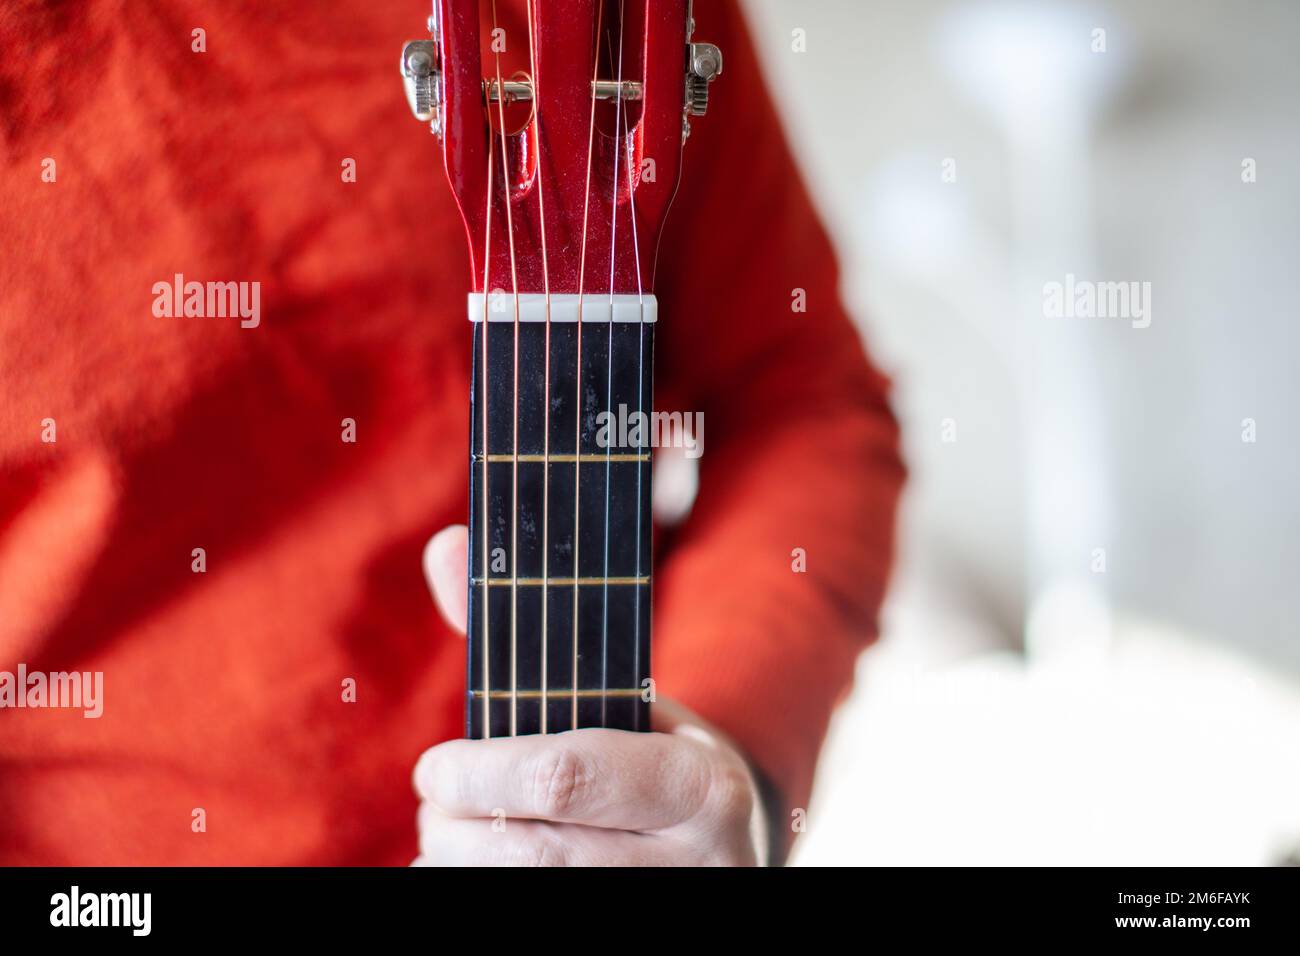 Close-up of a guitar player or a person learning to play the guitar. Stock Photo